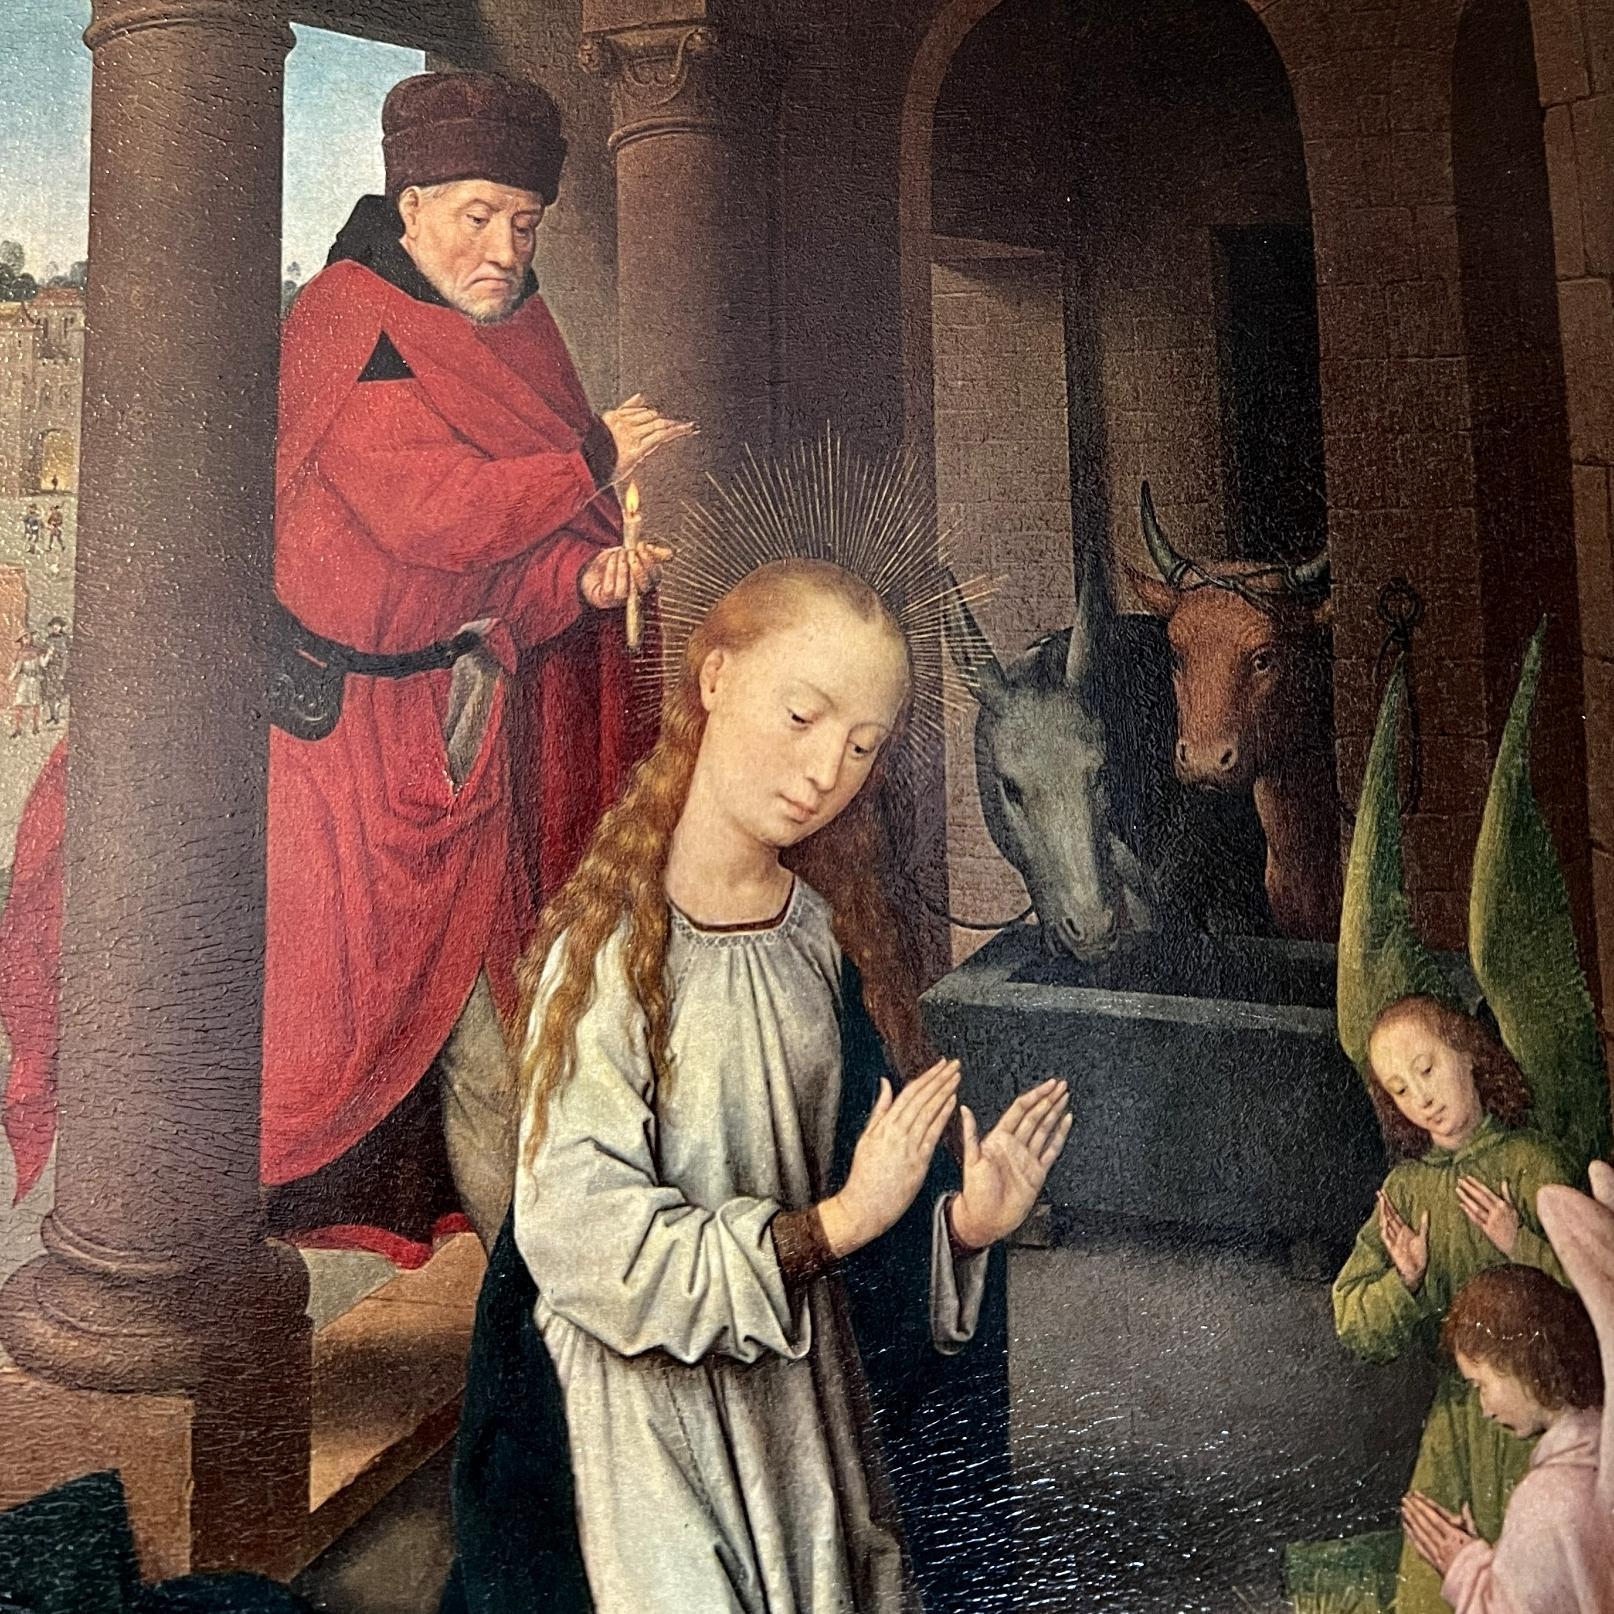 Print on Canvas of "The Nativity"